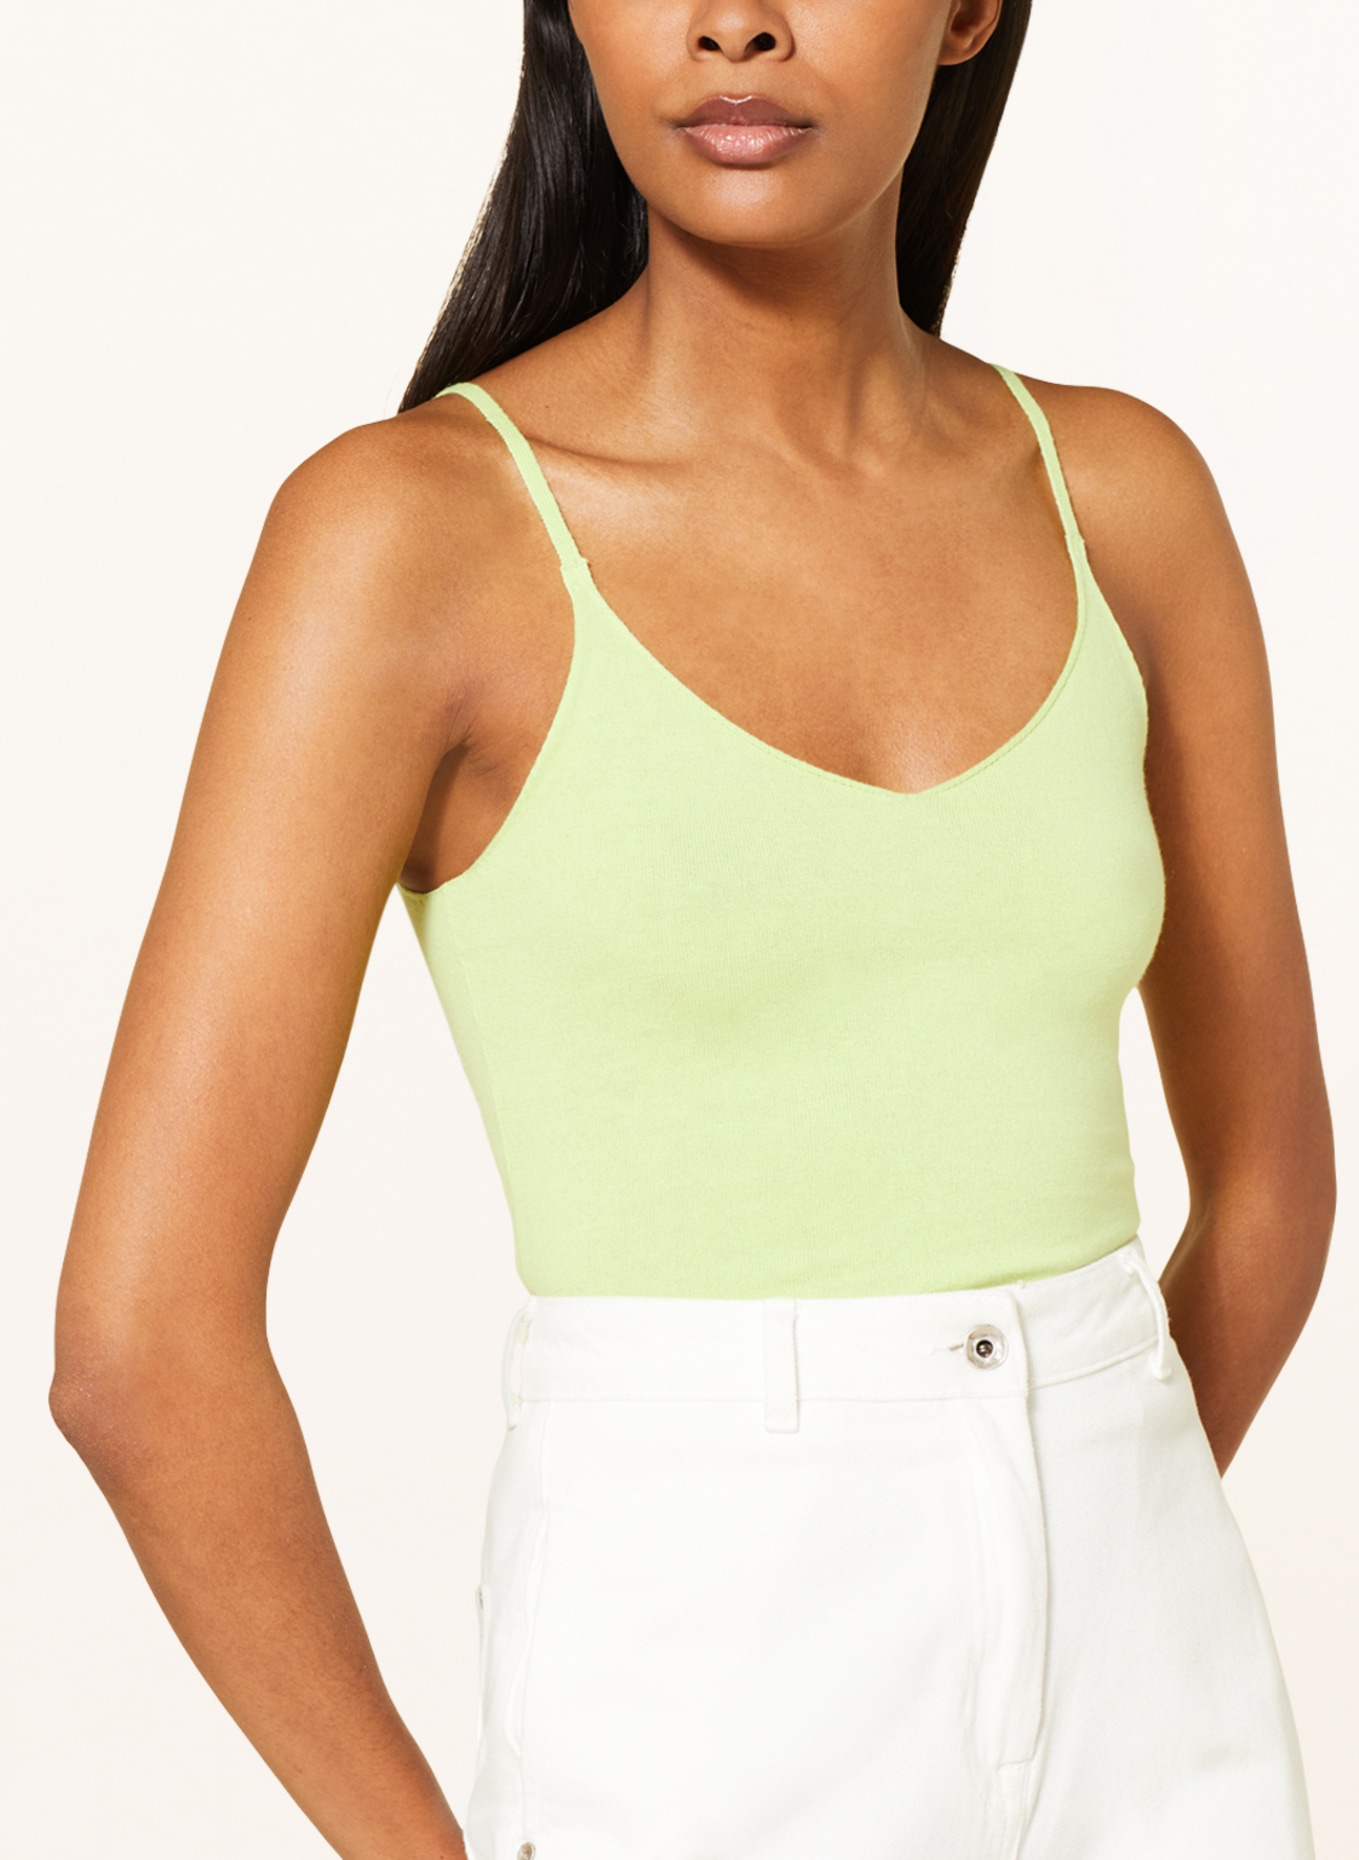 GITTA BANKO Knit top with cashmere, Color: LIGHT GREEN (Image 4)